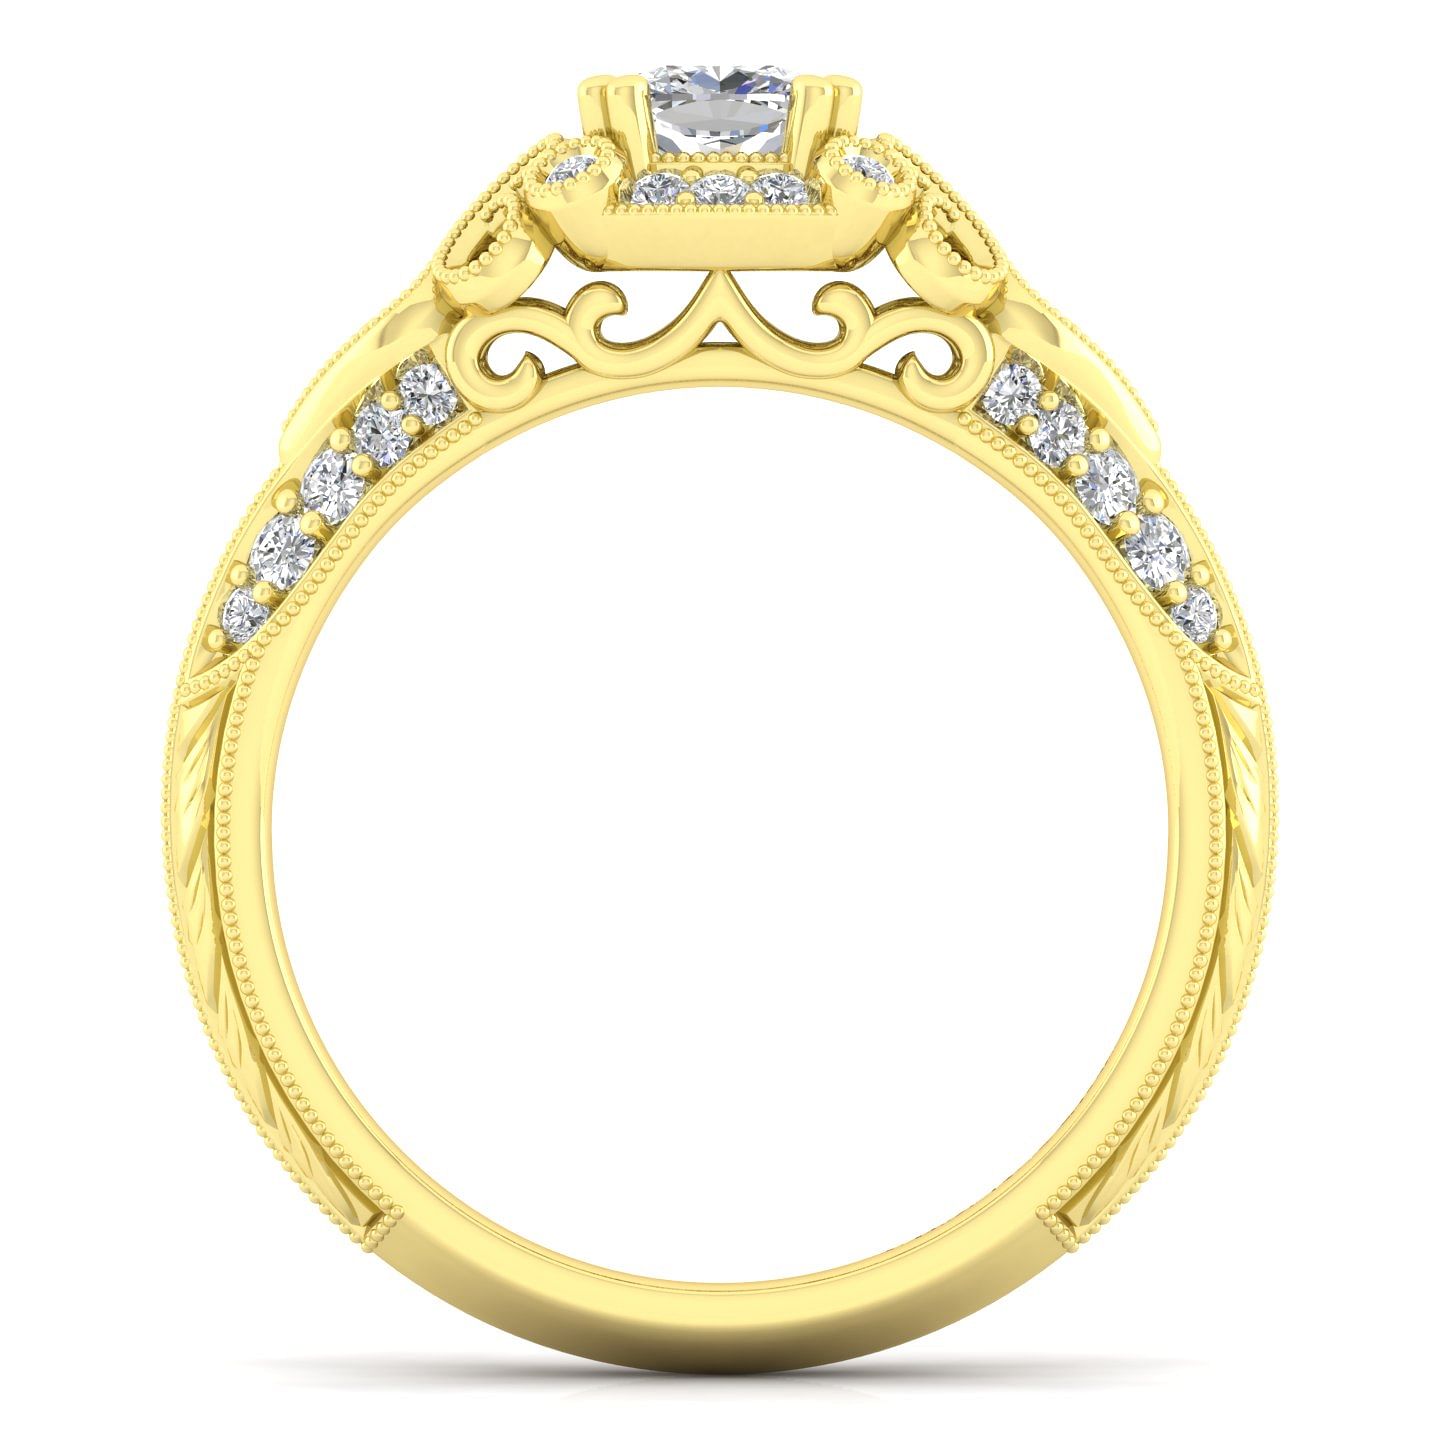 Unique 14K Yellow Gold Vintage Inspired Cushion Cut Diamond Halo Engagement Ring